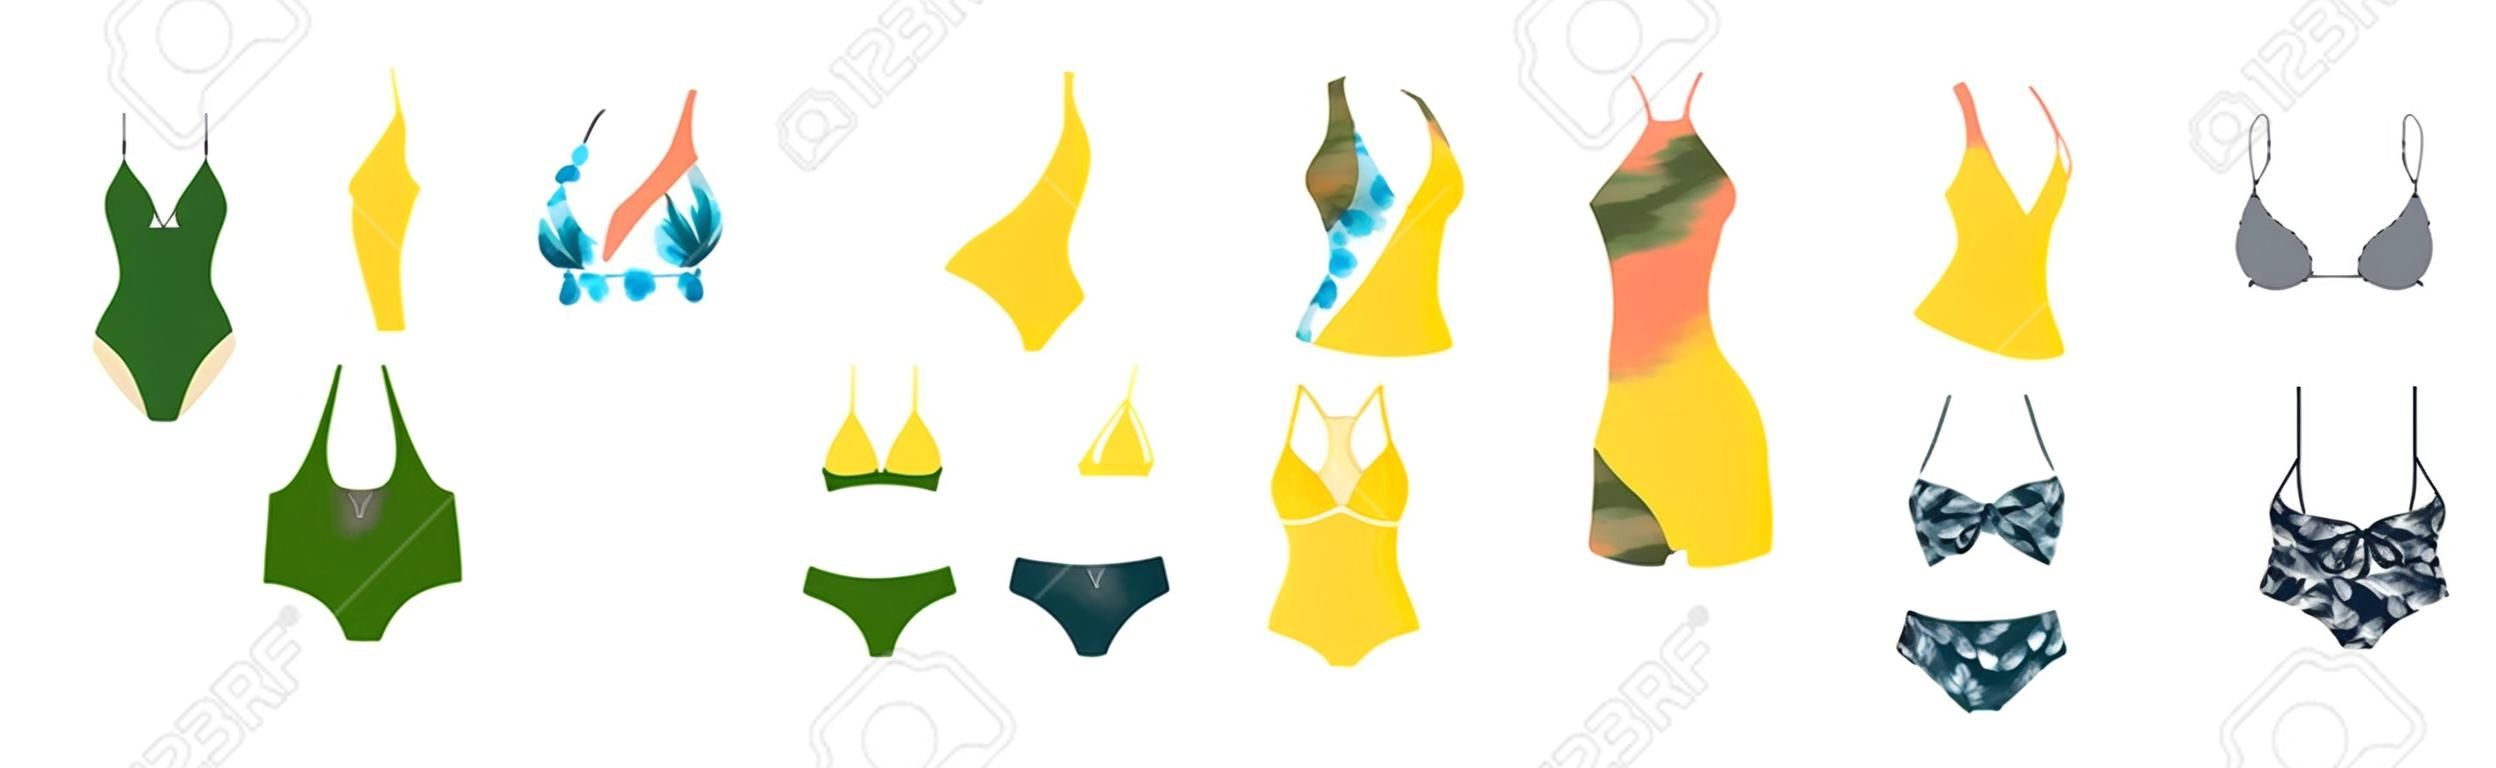 Set of female swimsuit icons. Different types of colorful beachwear silhouettes isolated on white